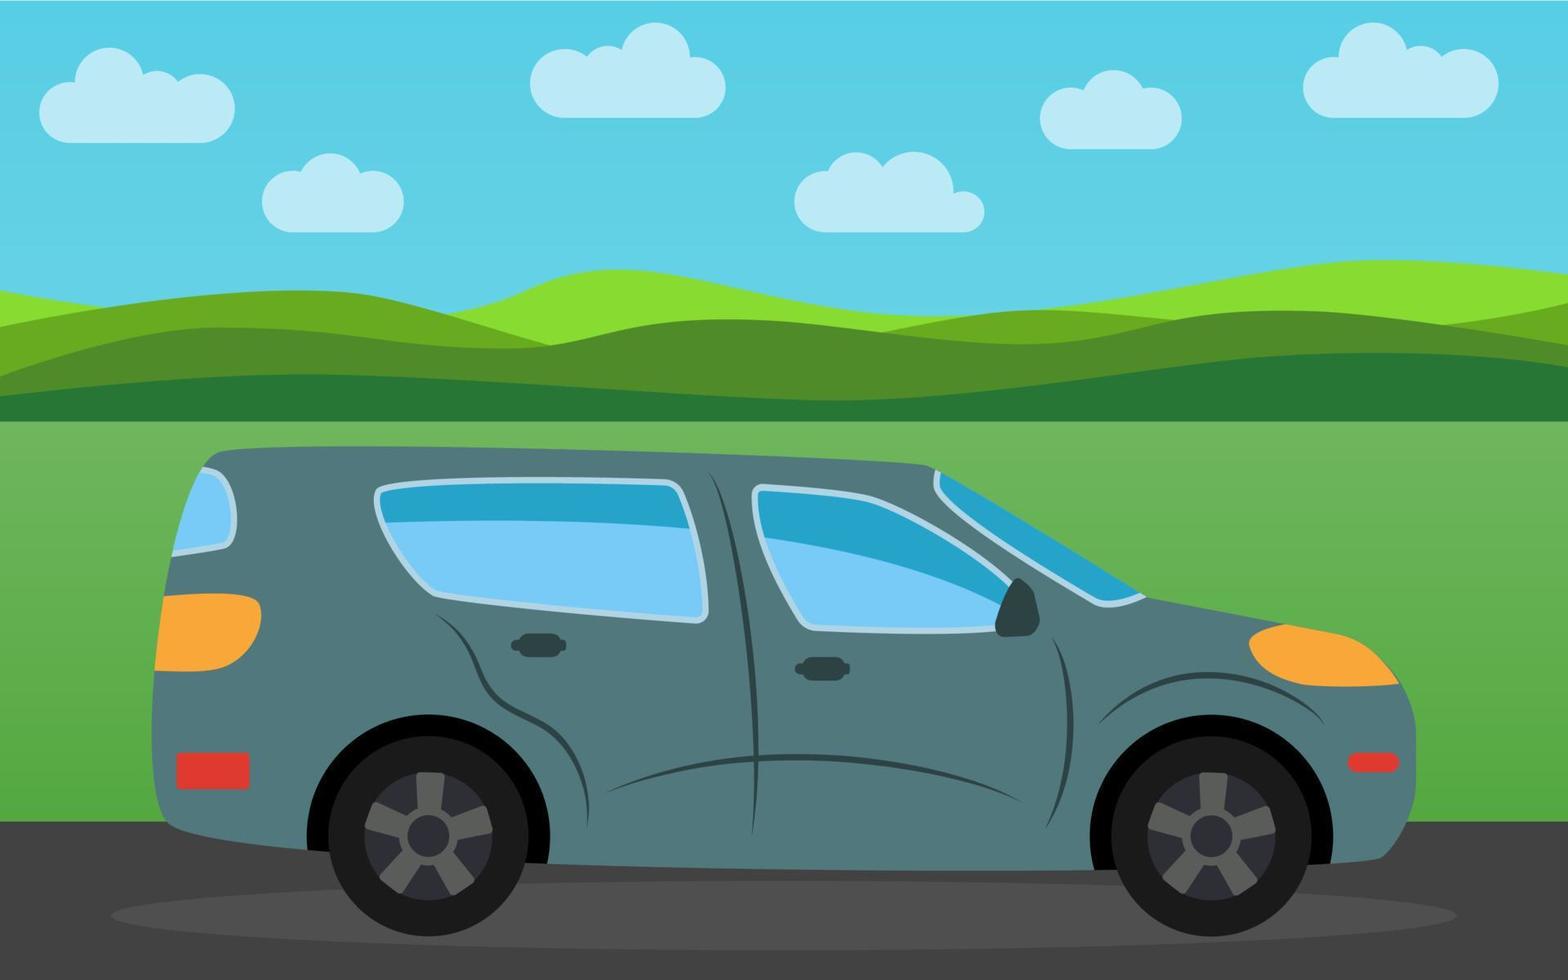 Car in the background of nature landscape in the daytime. Vector illustration.